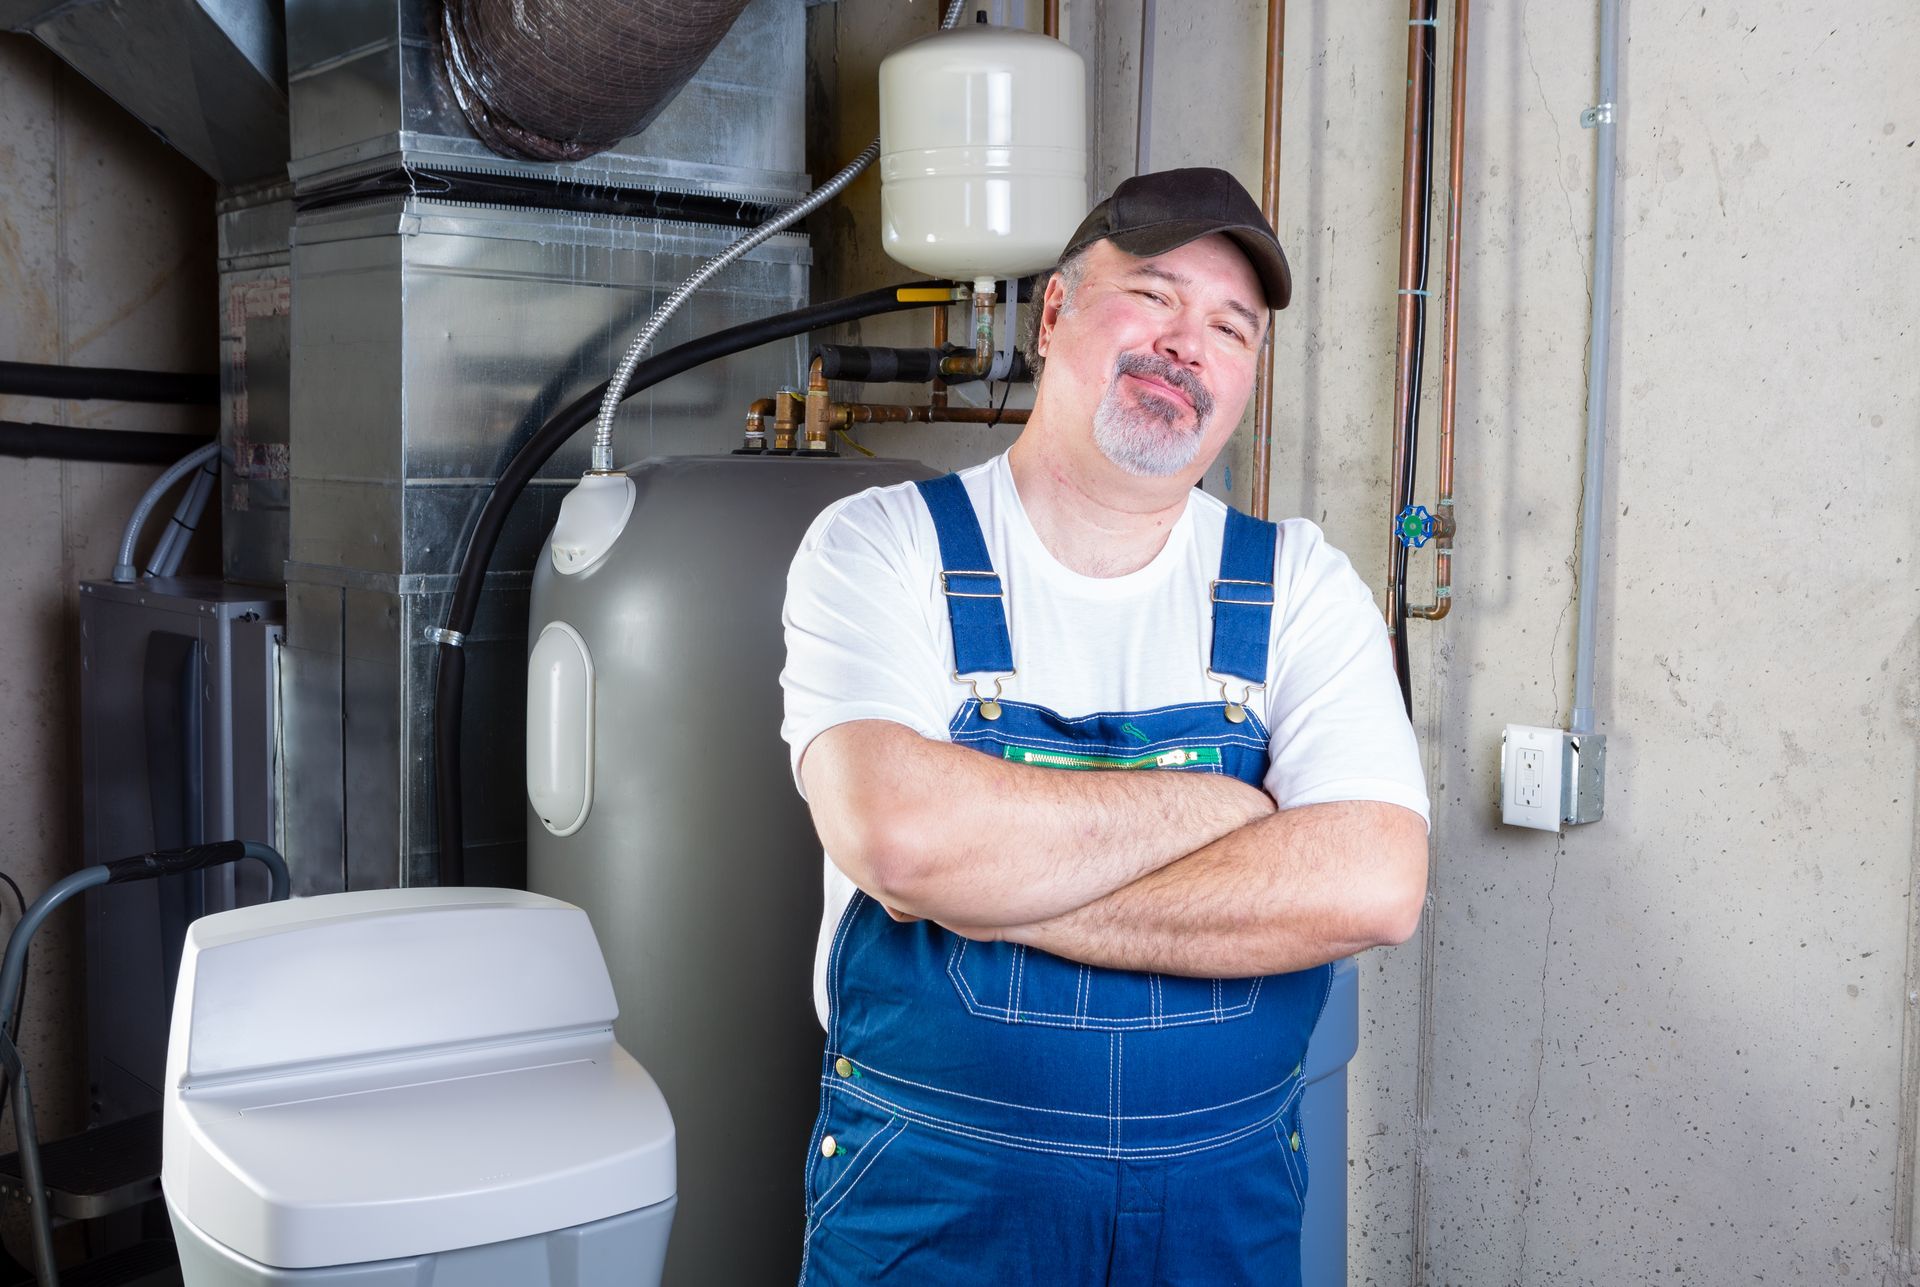 the plumber smiles at the camera having completed his task, the home now has a water softener protecting the home's water from harsh buildup and mineral deposits